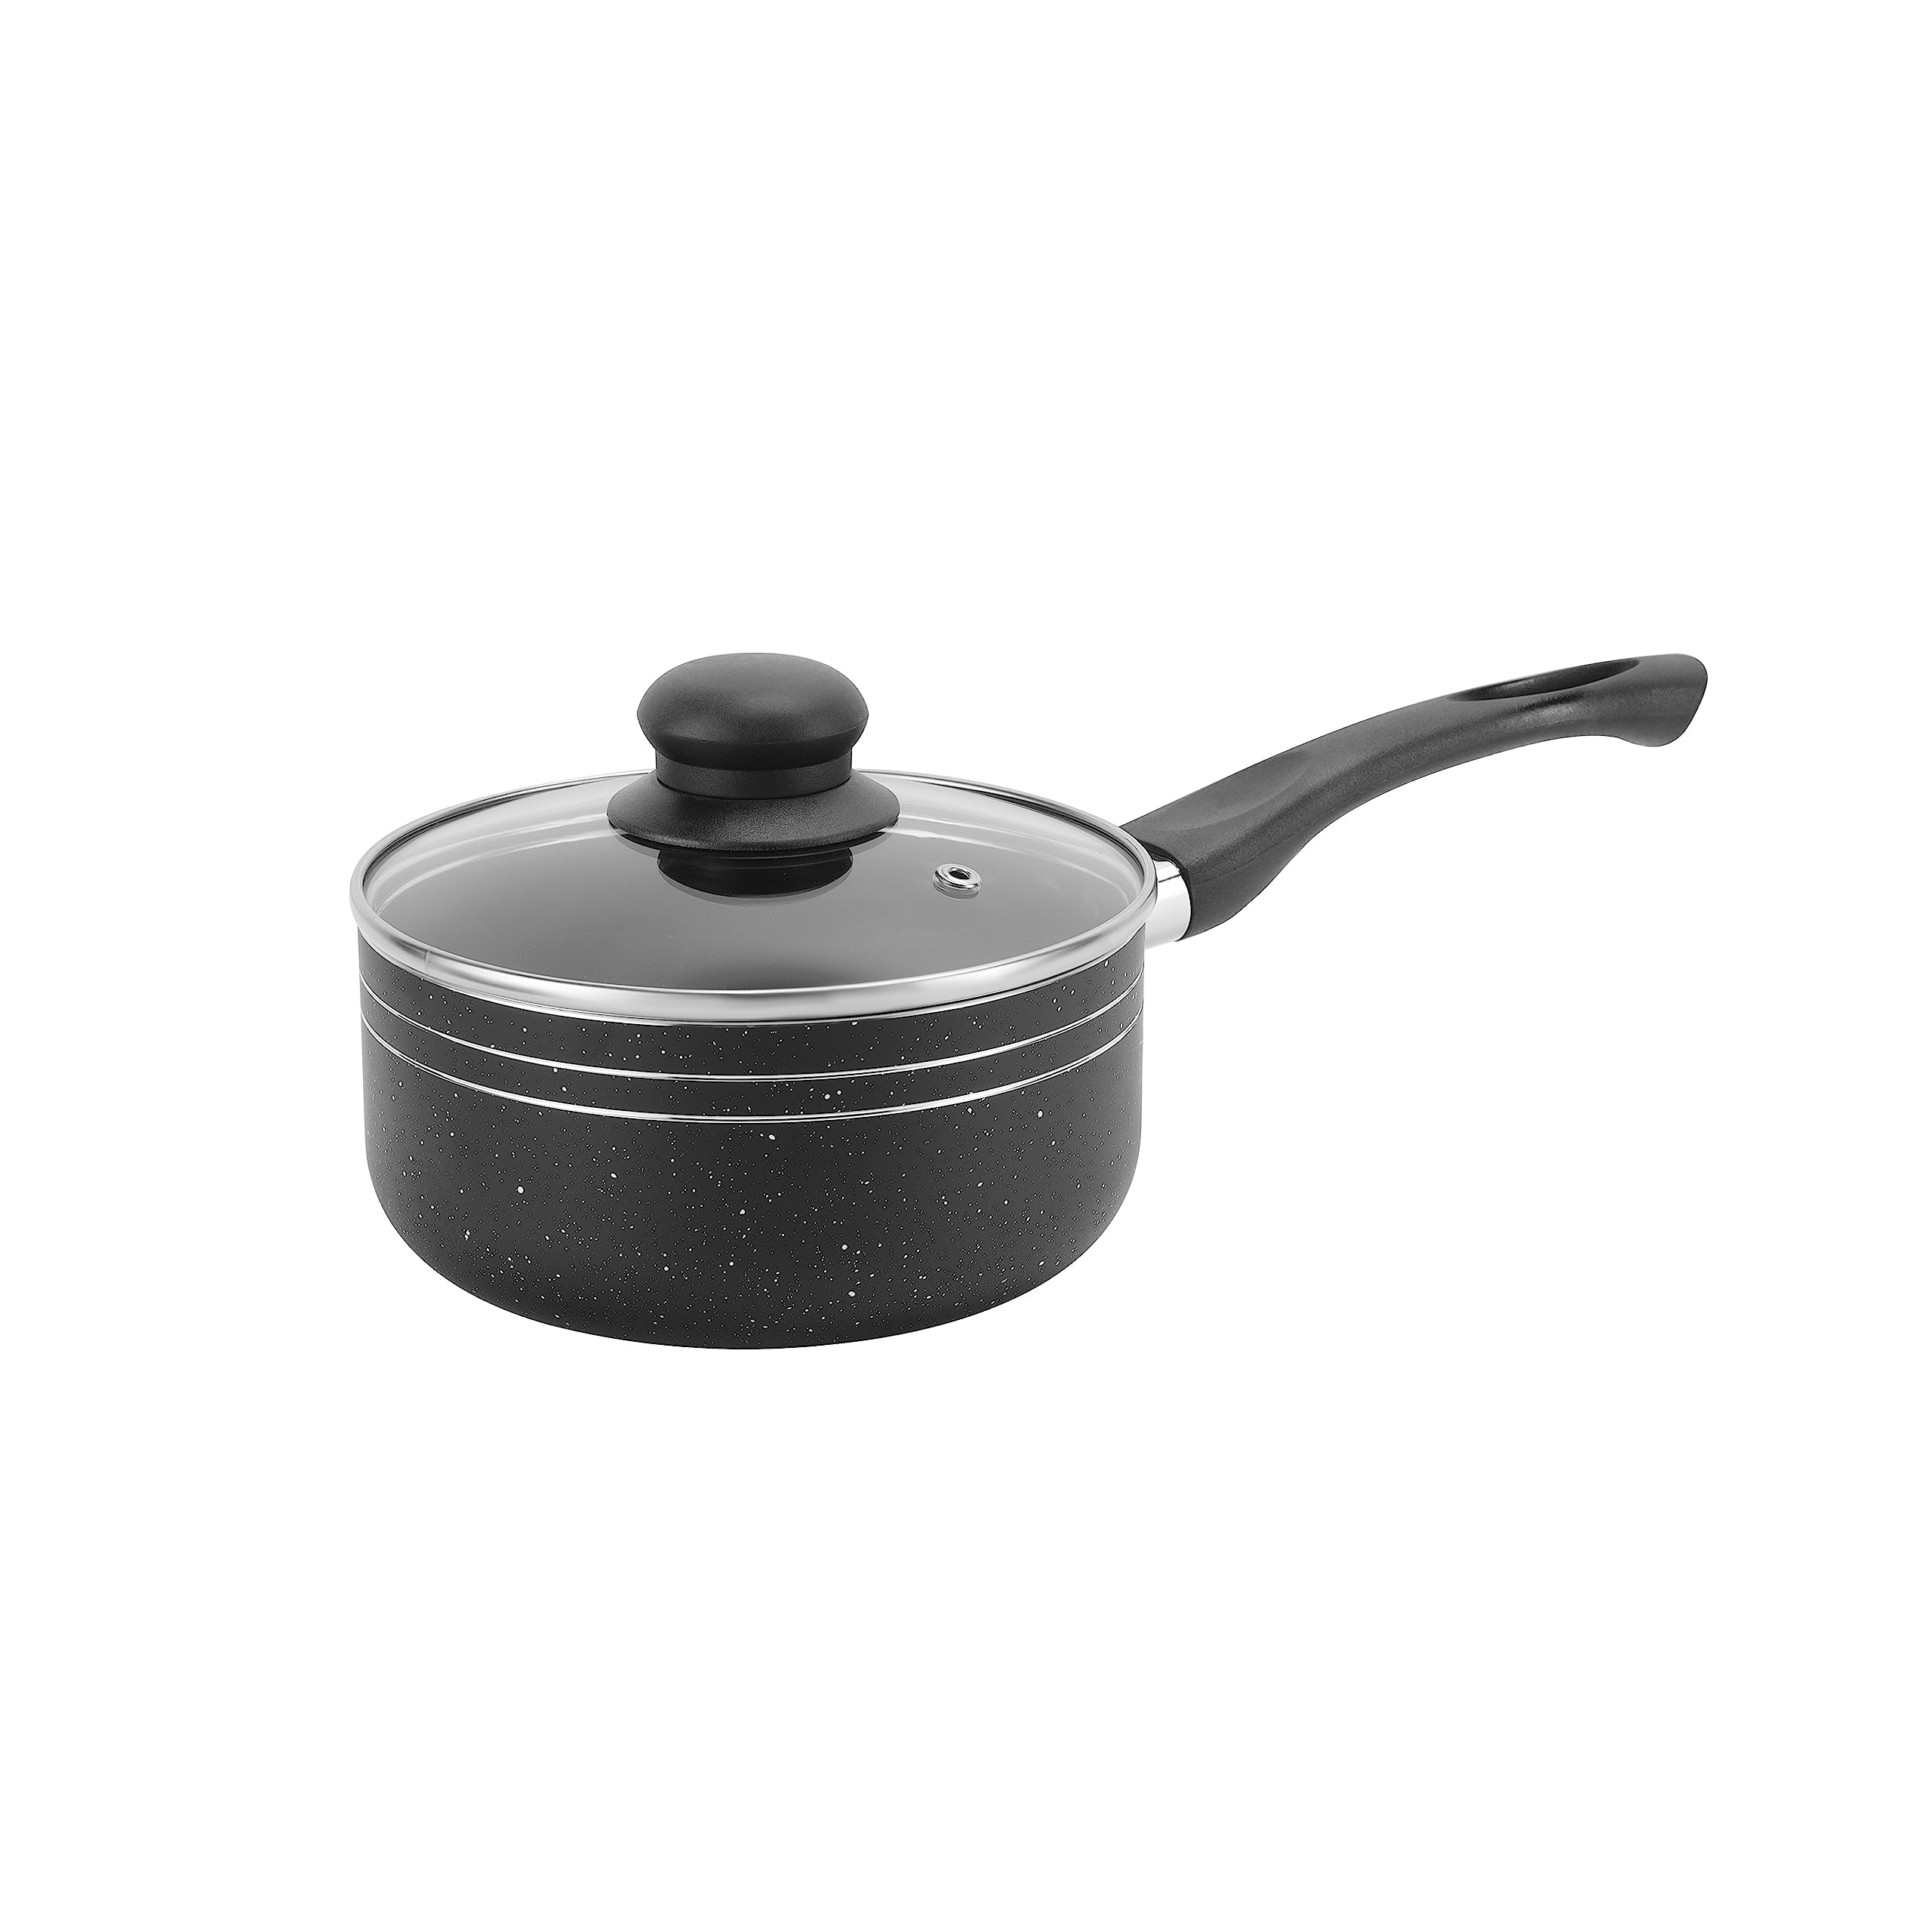 Royalford Ritz 9-Piece Non-Stick Cookware Set- RF11759 Aluminum Body With 3-Layer Construction, CD Bottom, Bakelite Handles And Glass Lid Black